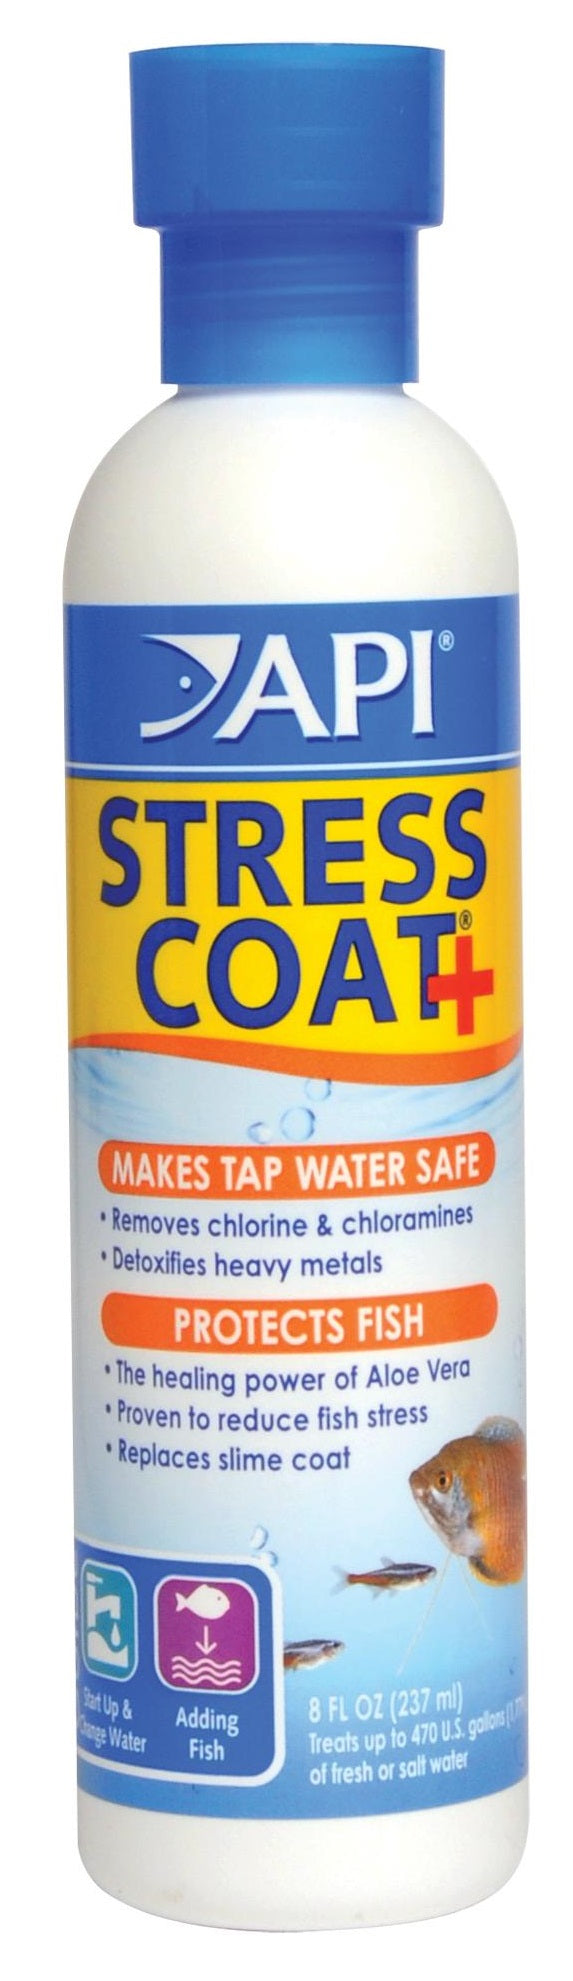 API Stress Coat + Fish and Tap Water Conditioner